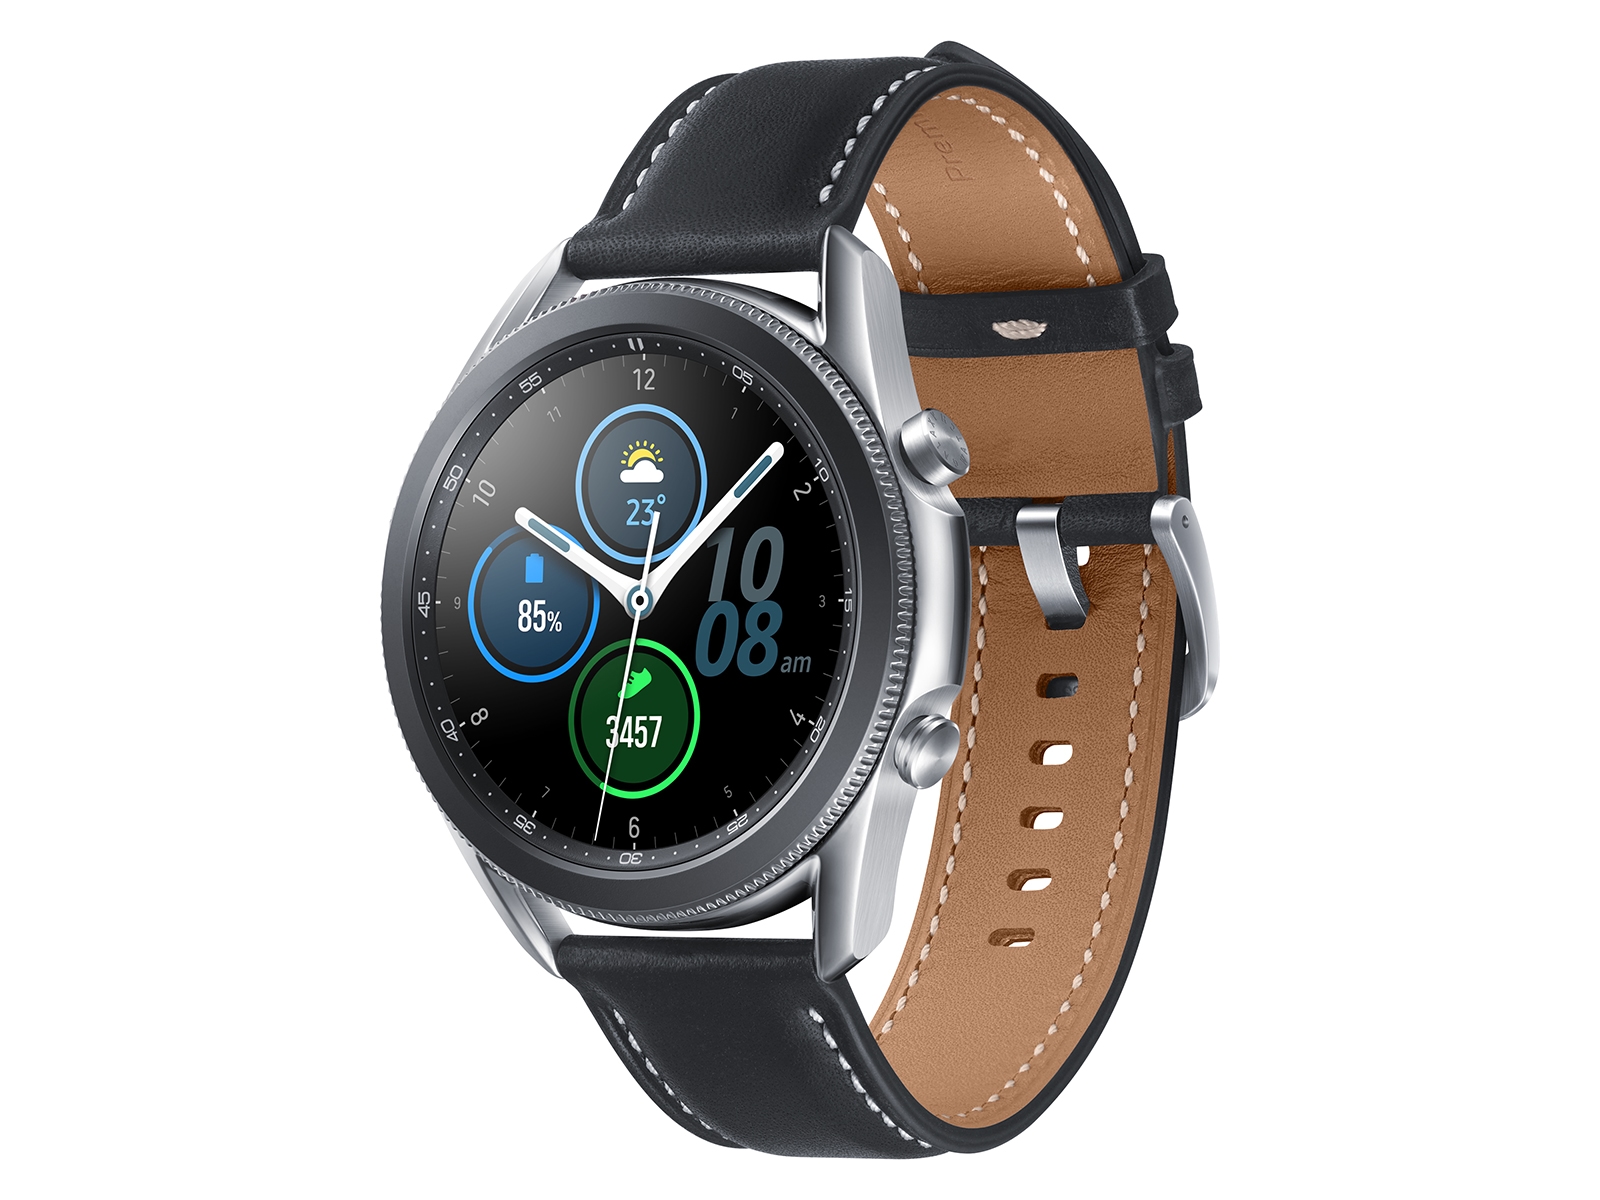 https://image-us.samsung.com/SamsungUS/home/mobile/wearables/smartwatches/pdp/gwa-3/gallery/sm-r840nzsaxar/gallery-02-110672-bt_sm-r840_galaxy_watch_3_45mm_mystic_silver_v_right-1600x1200.jpg?$720_576_PNG$